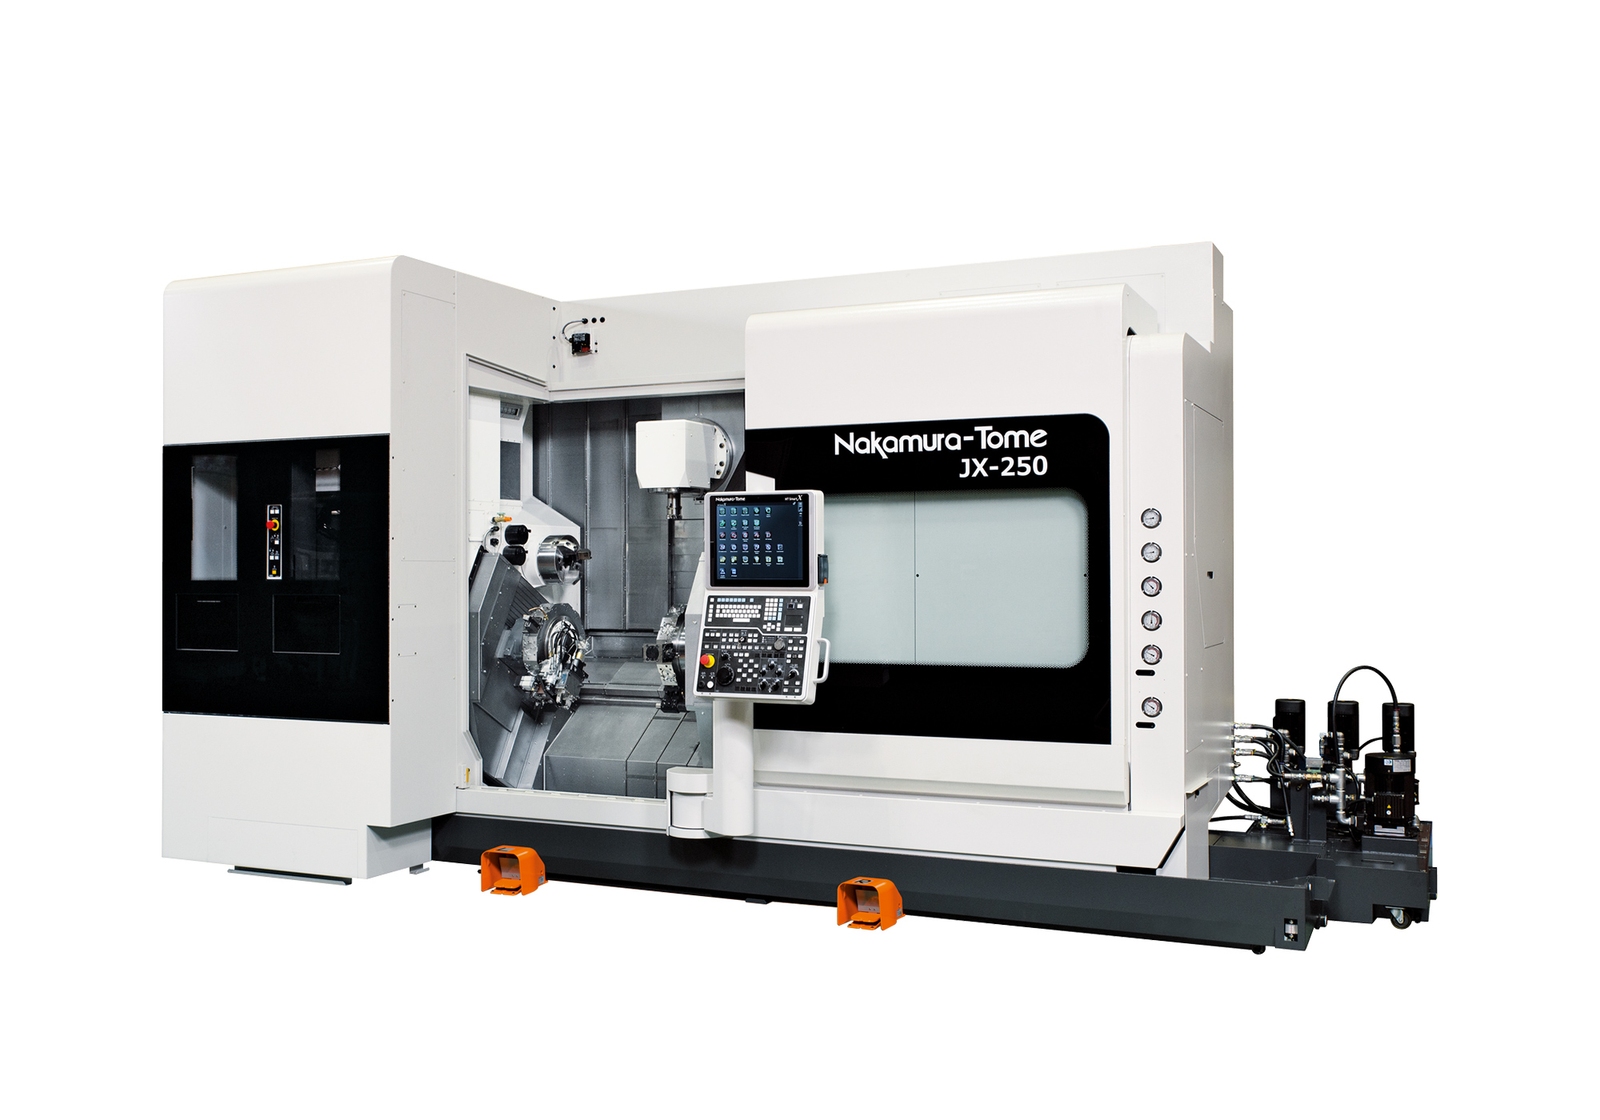 Nakamura-Tome Empowers Machine Operators With Smart Tuning Feature